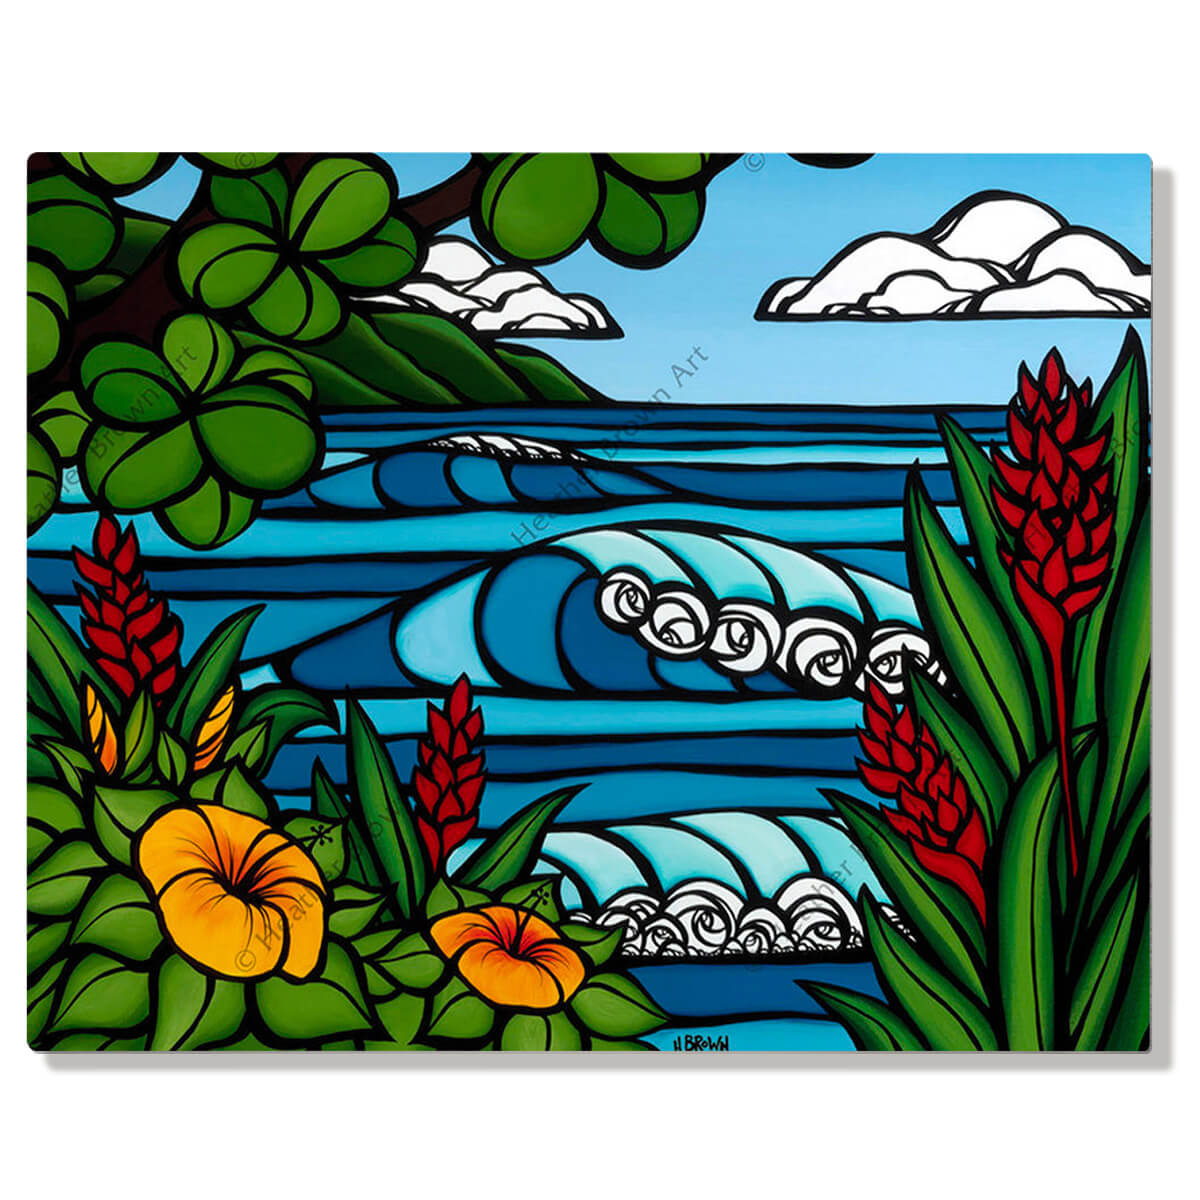 A metal art print featuring hibiscus flowers and bright ginger flowers by Hawaii surf artist Heather Brown